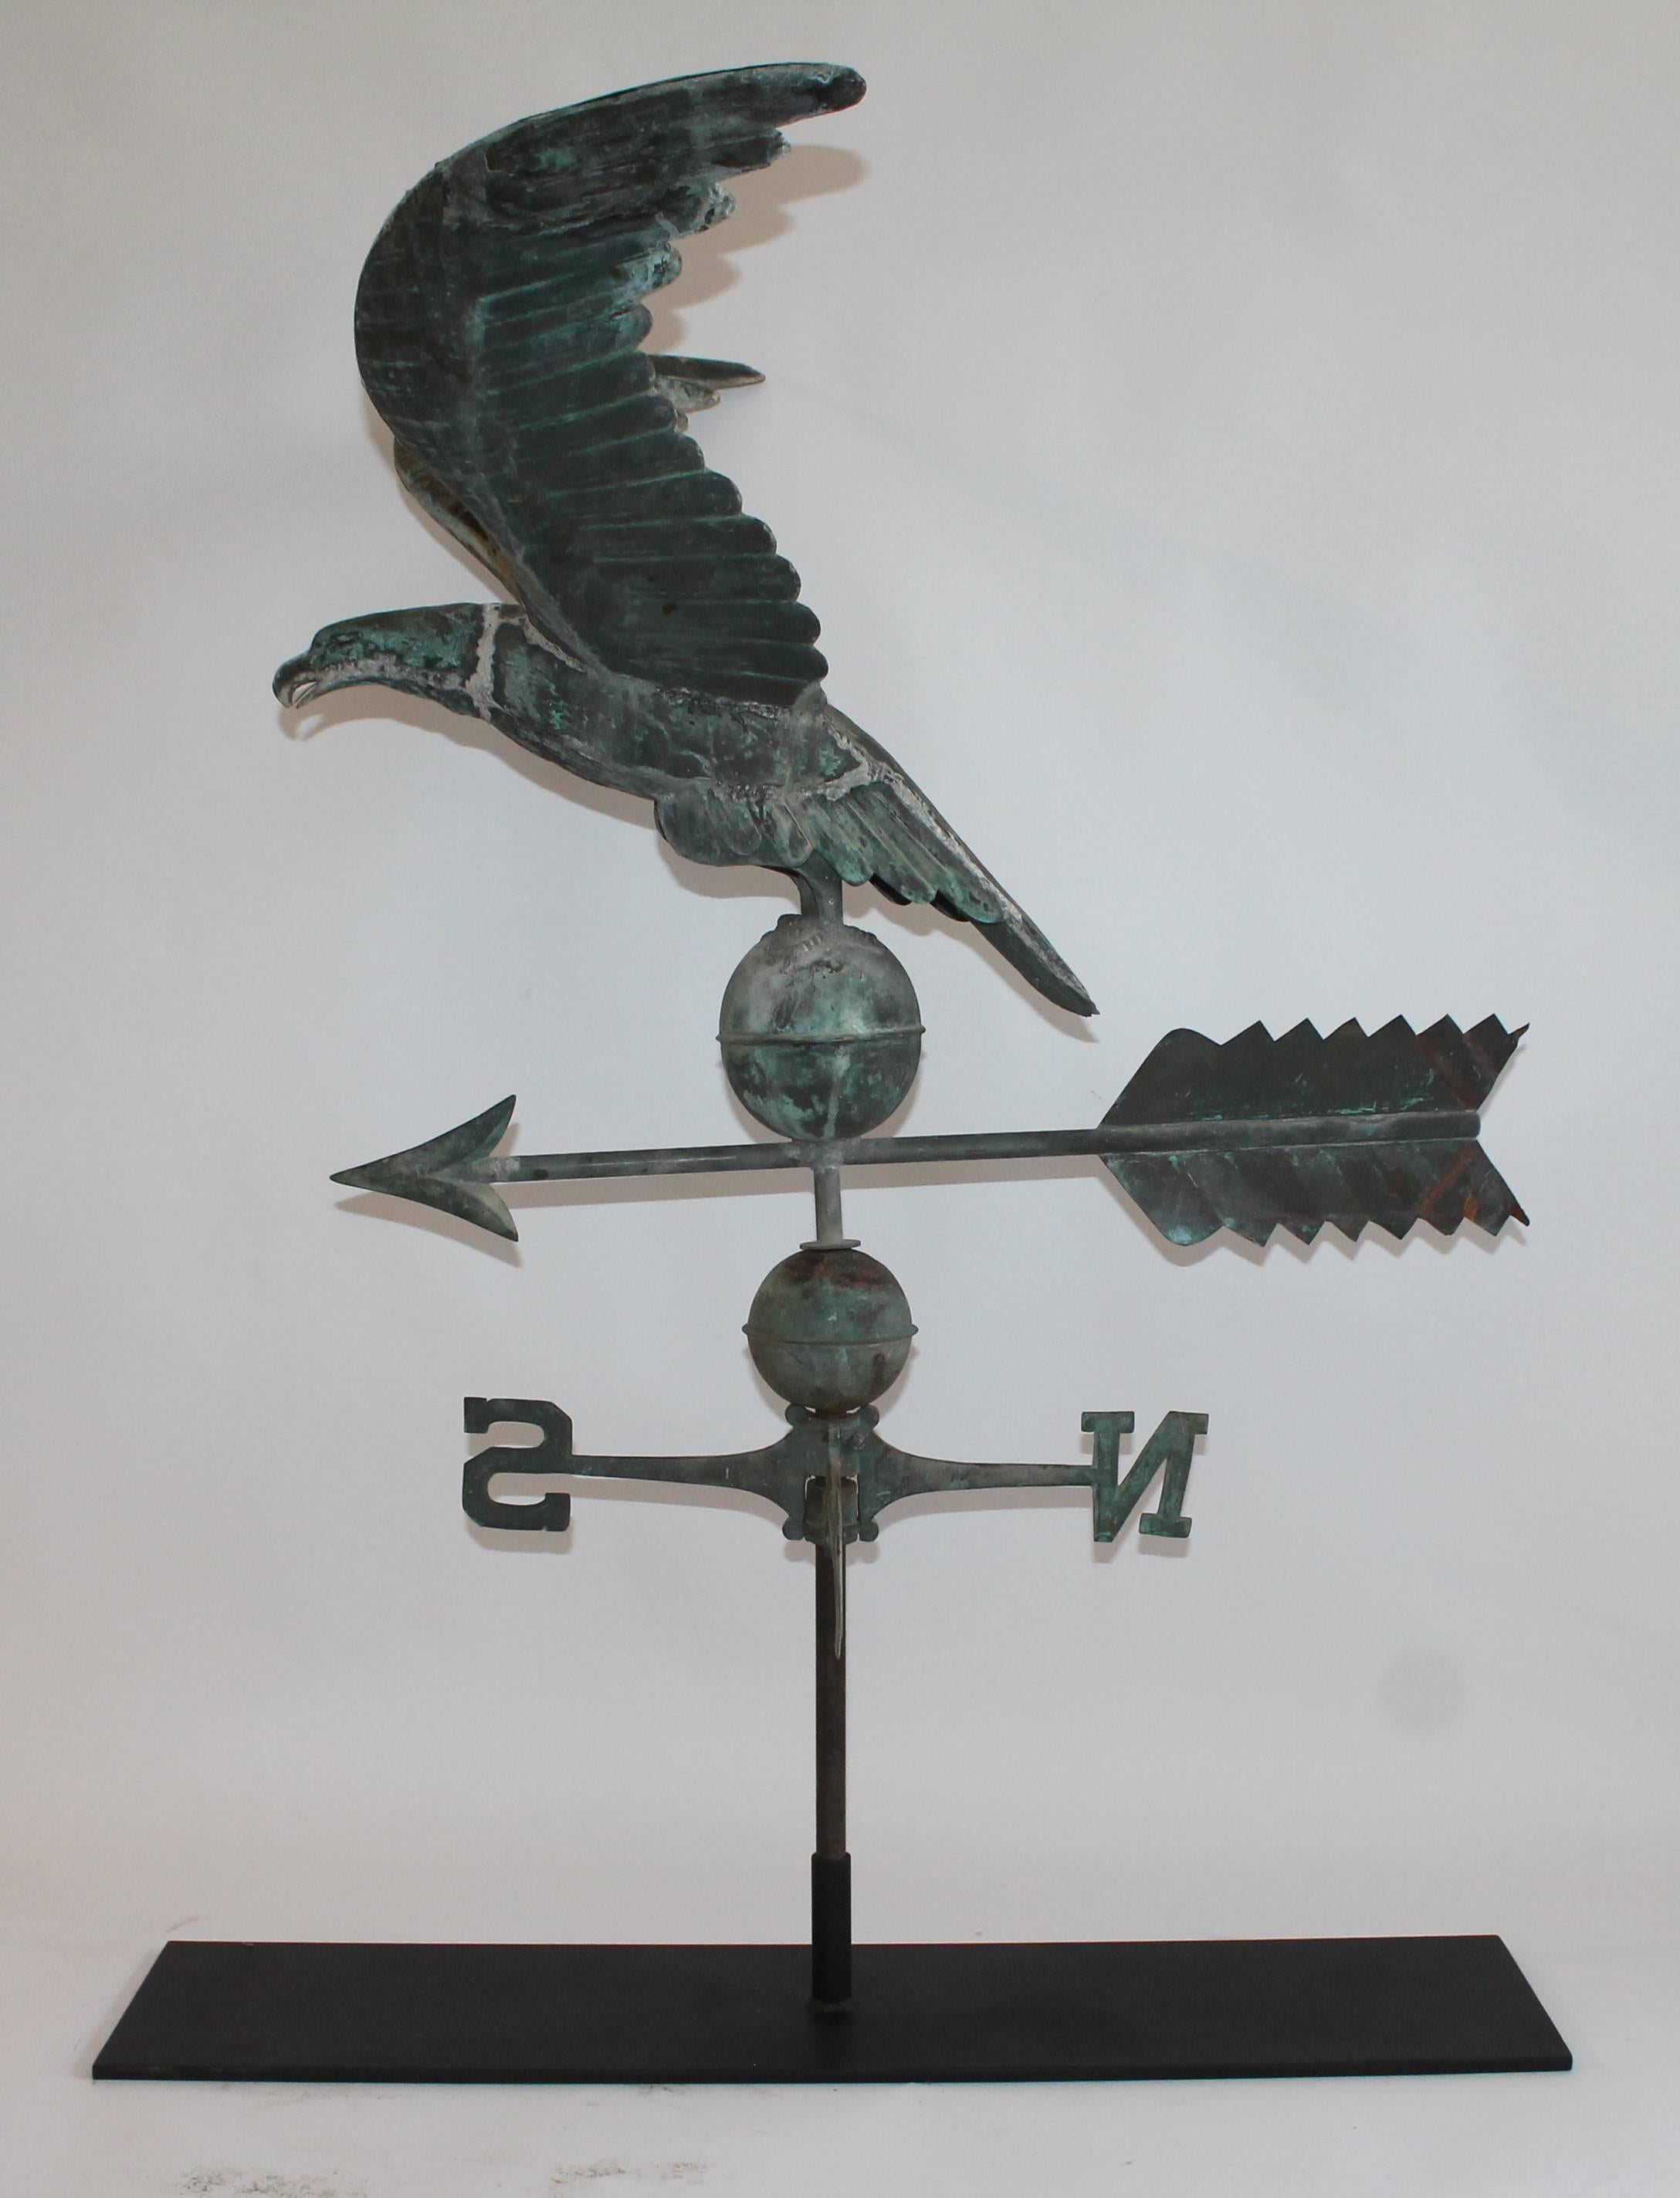 19th century monumental full body copper eagle weather vane in good condition. The patina surface is great and the base has the original Directional siting on a large custom-made iron stand or mount. This eagle was found in New England. Can be